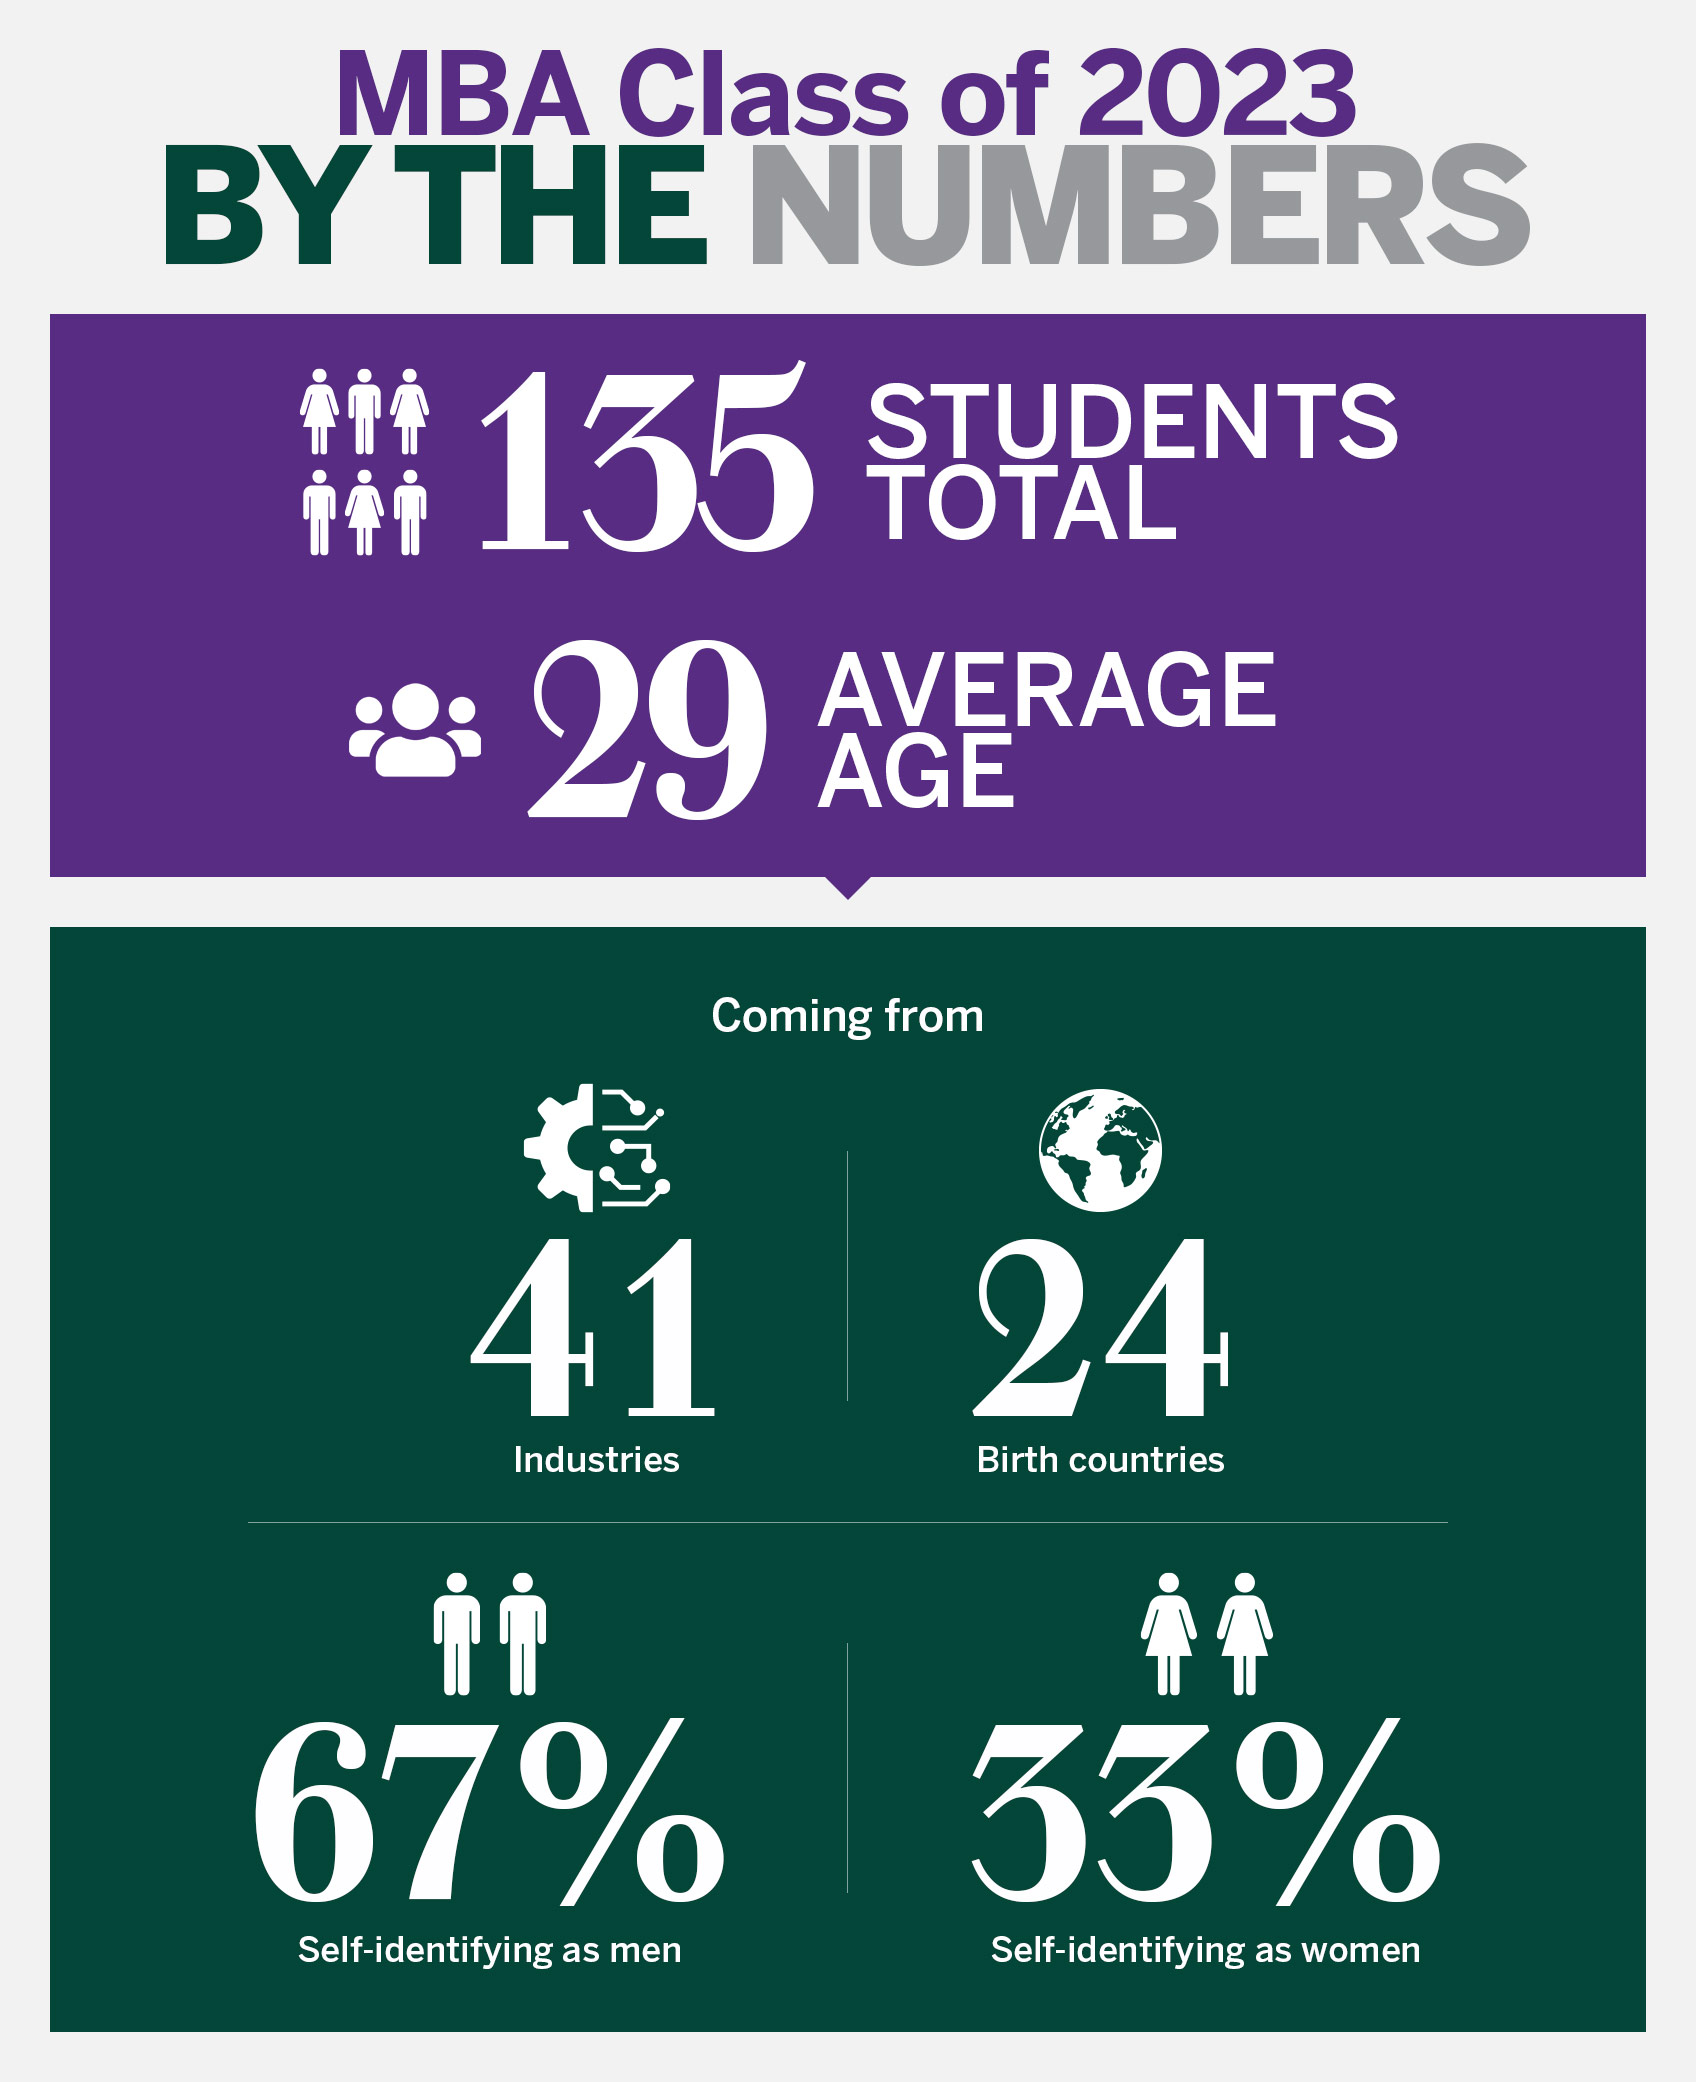 MBA Class of 2023 By the Numbers